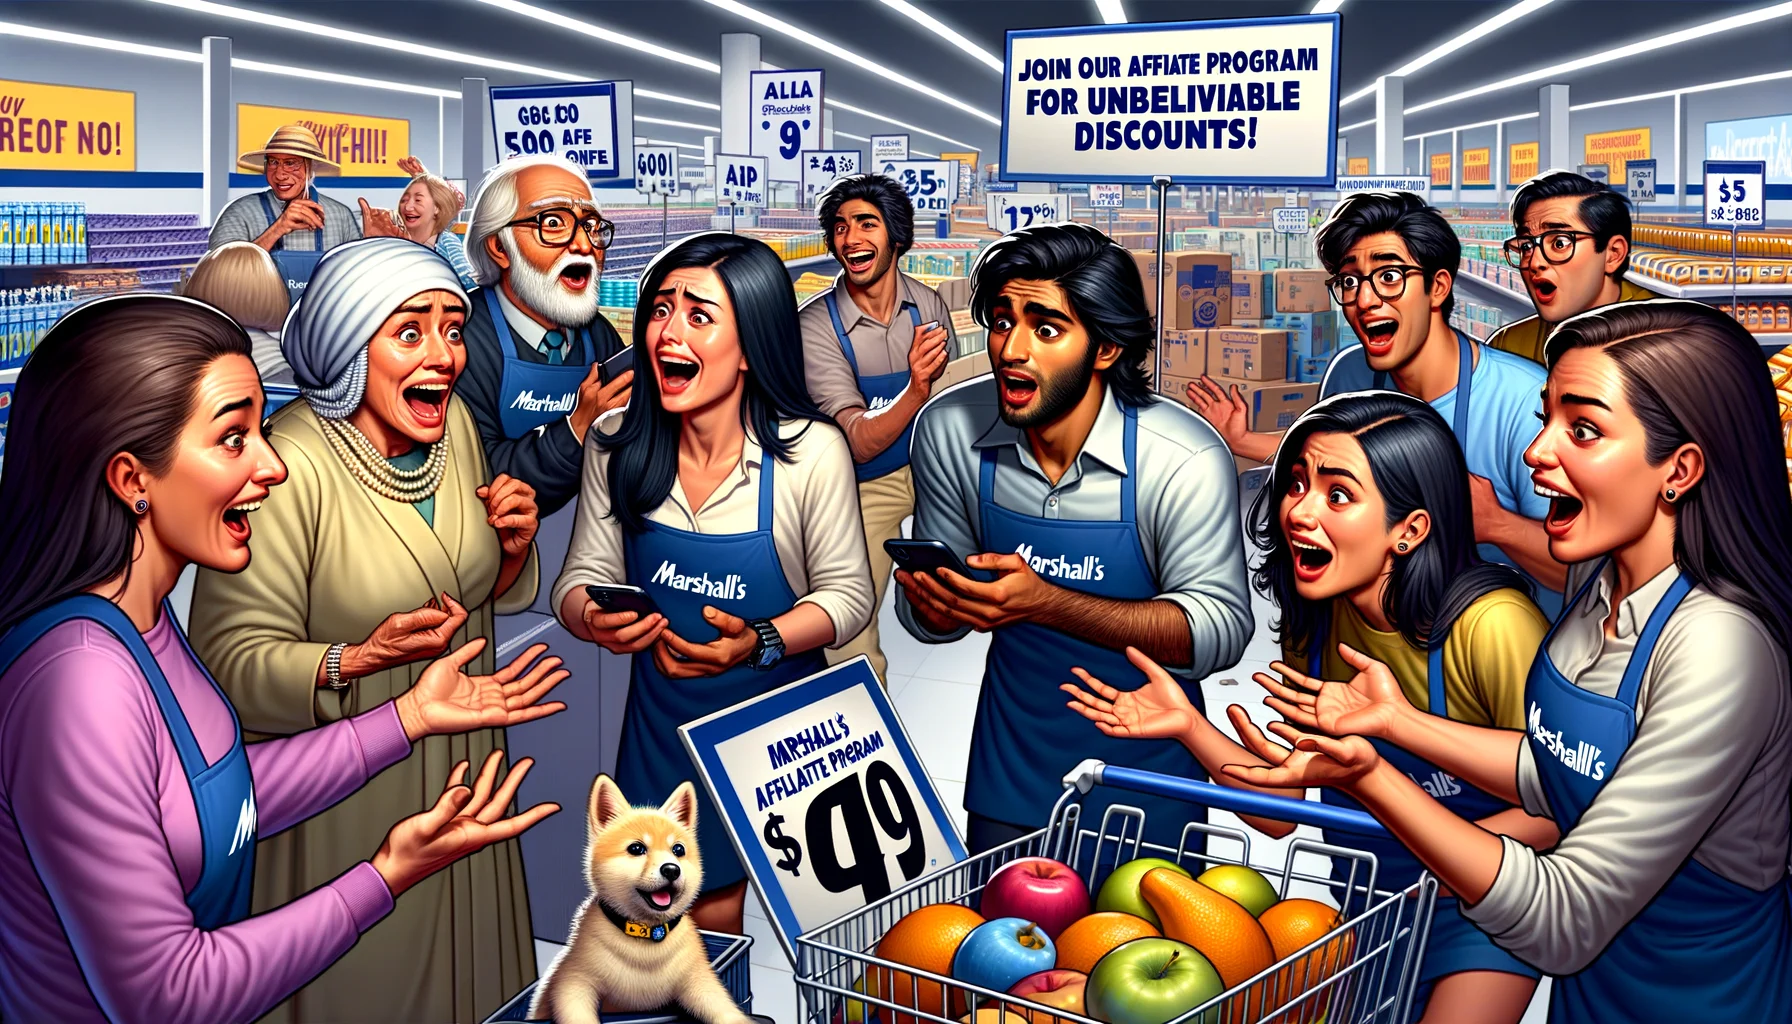 Generate a light-hearted, humorous image illustrating a whimsical situation around 'Marshalls Affiliate Program'. Imagine a busy shopping scene at a Marshall's store where diverse group of customers (a Caucasian woman, a Middle-Eastern man, and a Hispanic teenager) are confused and surprised to find products with price tags displaying massive affiliate discounts. They are laughing and pointing at the price tags. In the background, a South Asian store manager is chuckling, holding a sign saying 'Join our Affiliate Program for Unbelievable Discounts!'. Add some fun elements like a confused dog wearing a price tag collar and shelves stacked with comically oversized products.